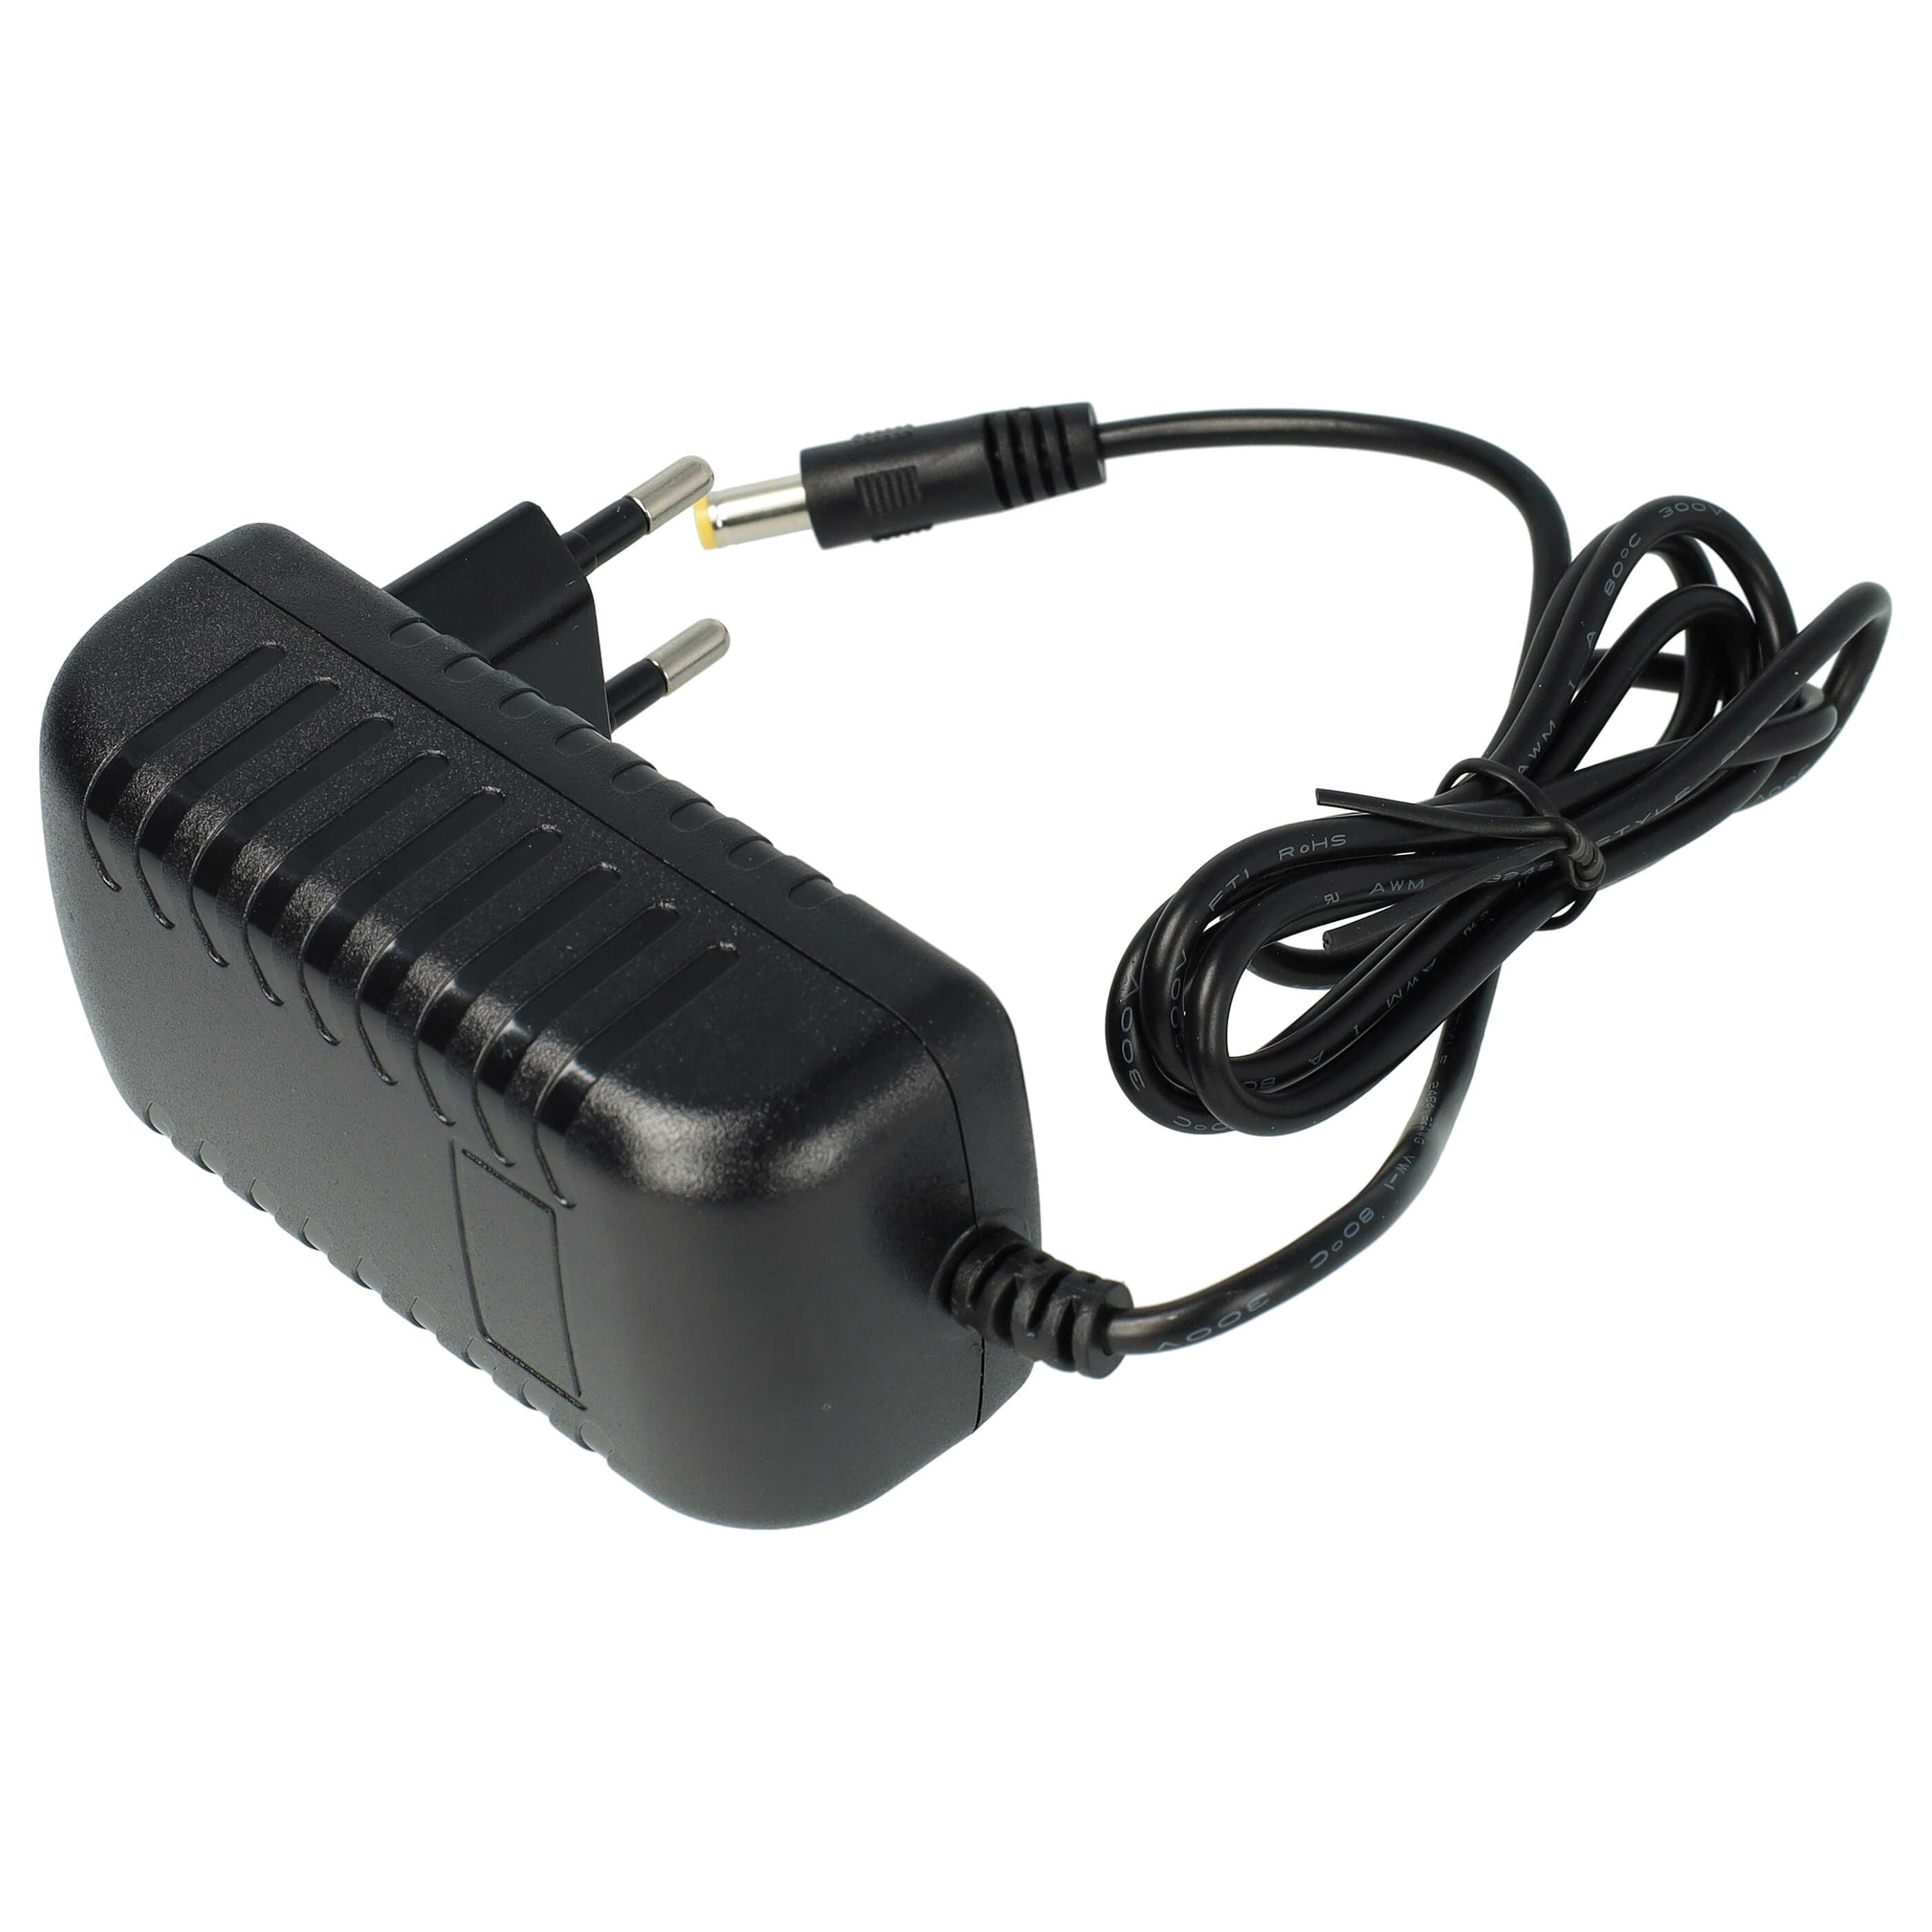 Mains Power Adapter suitable for PC Engines ALIX.2C0 Electric Devices - 18 V, 2 A